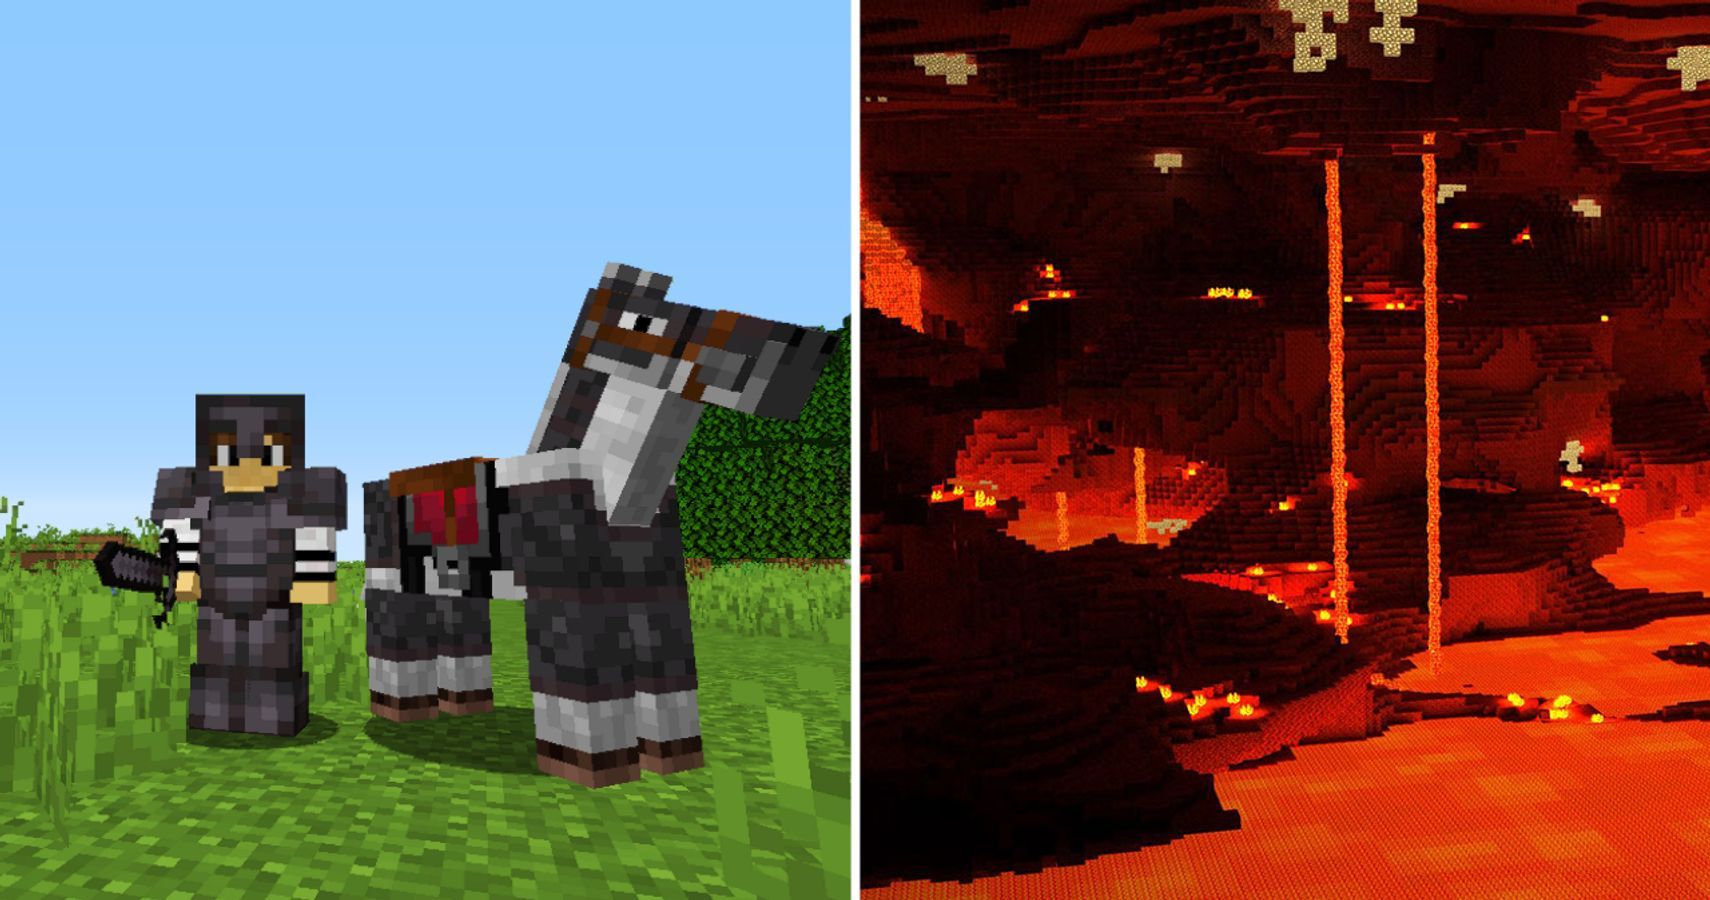 Minecraft Nether Update 1.16 patch notes: Netherite, new biomes